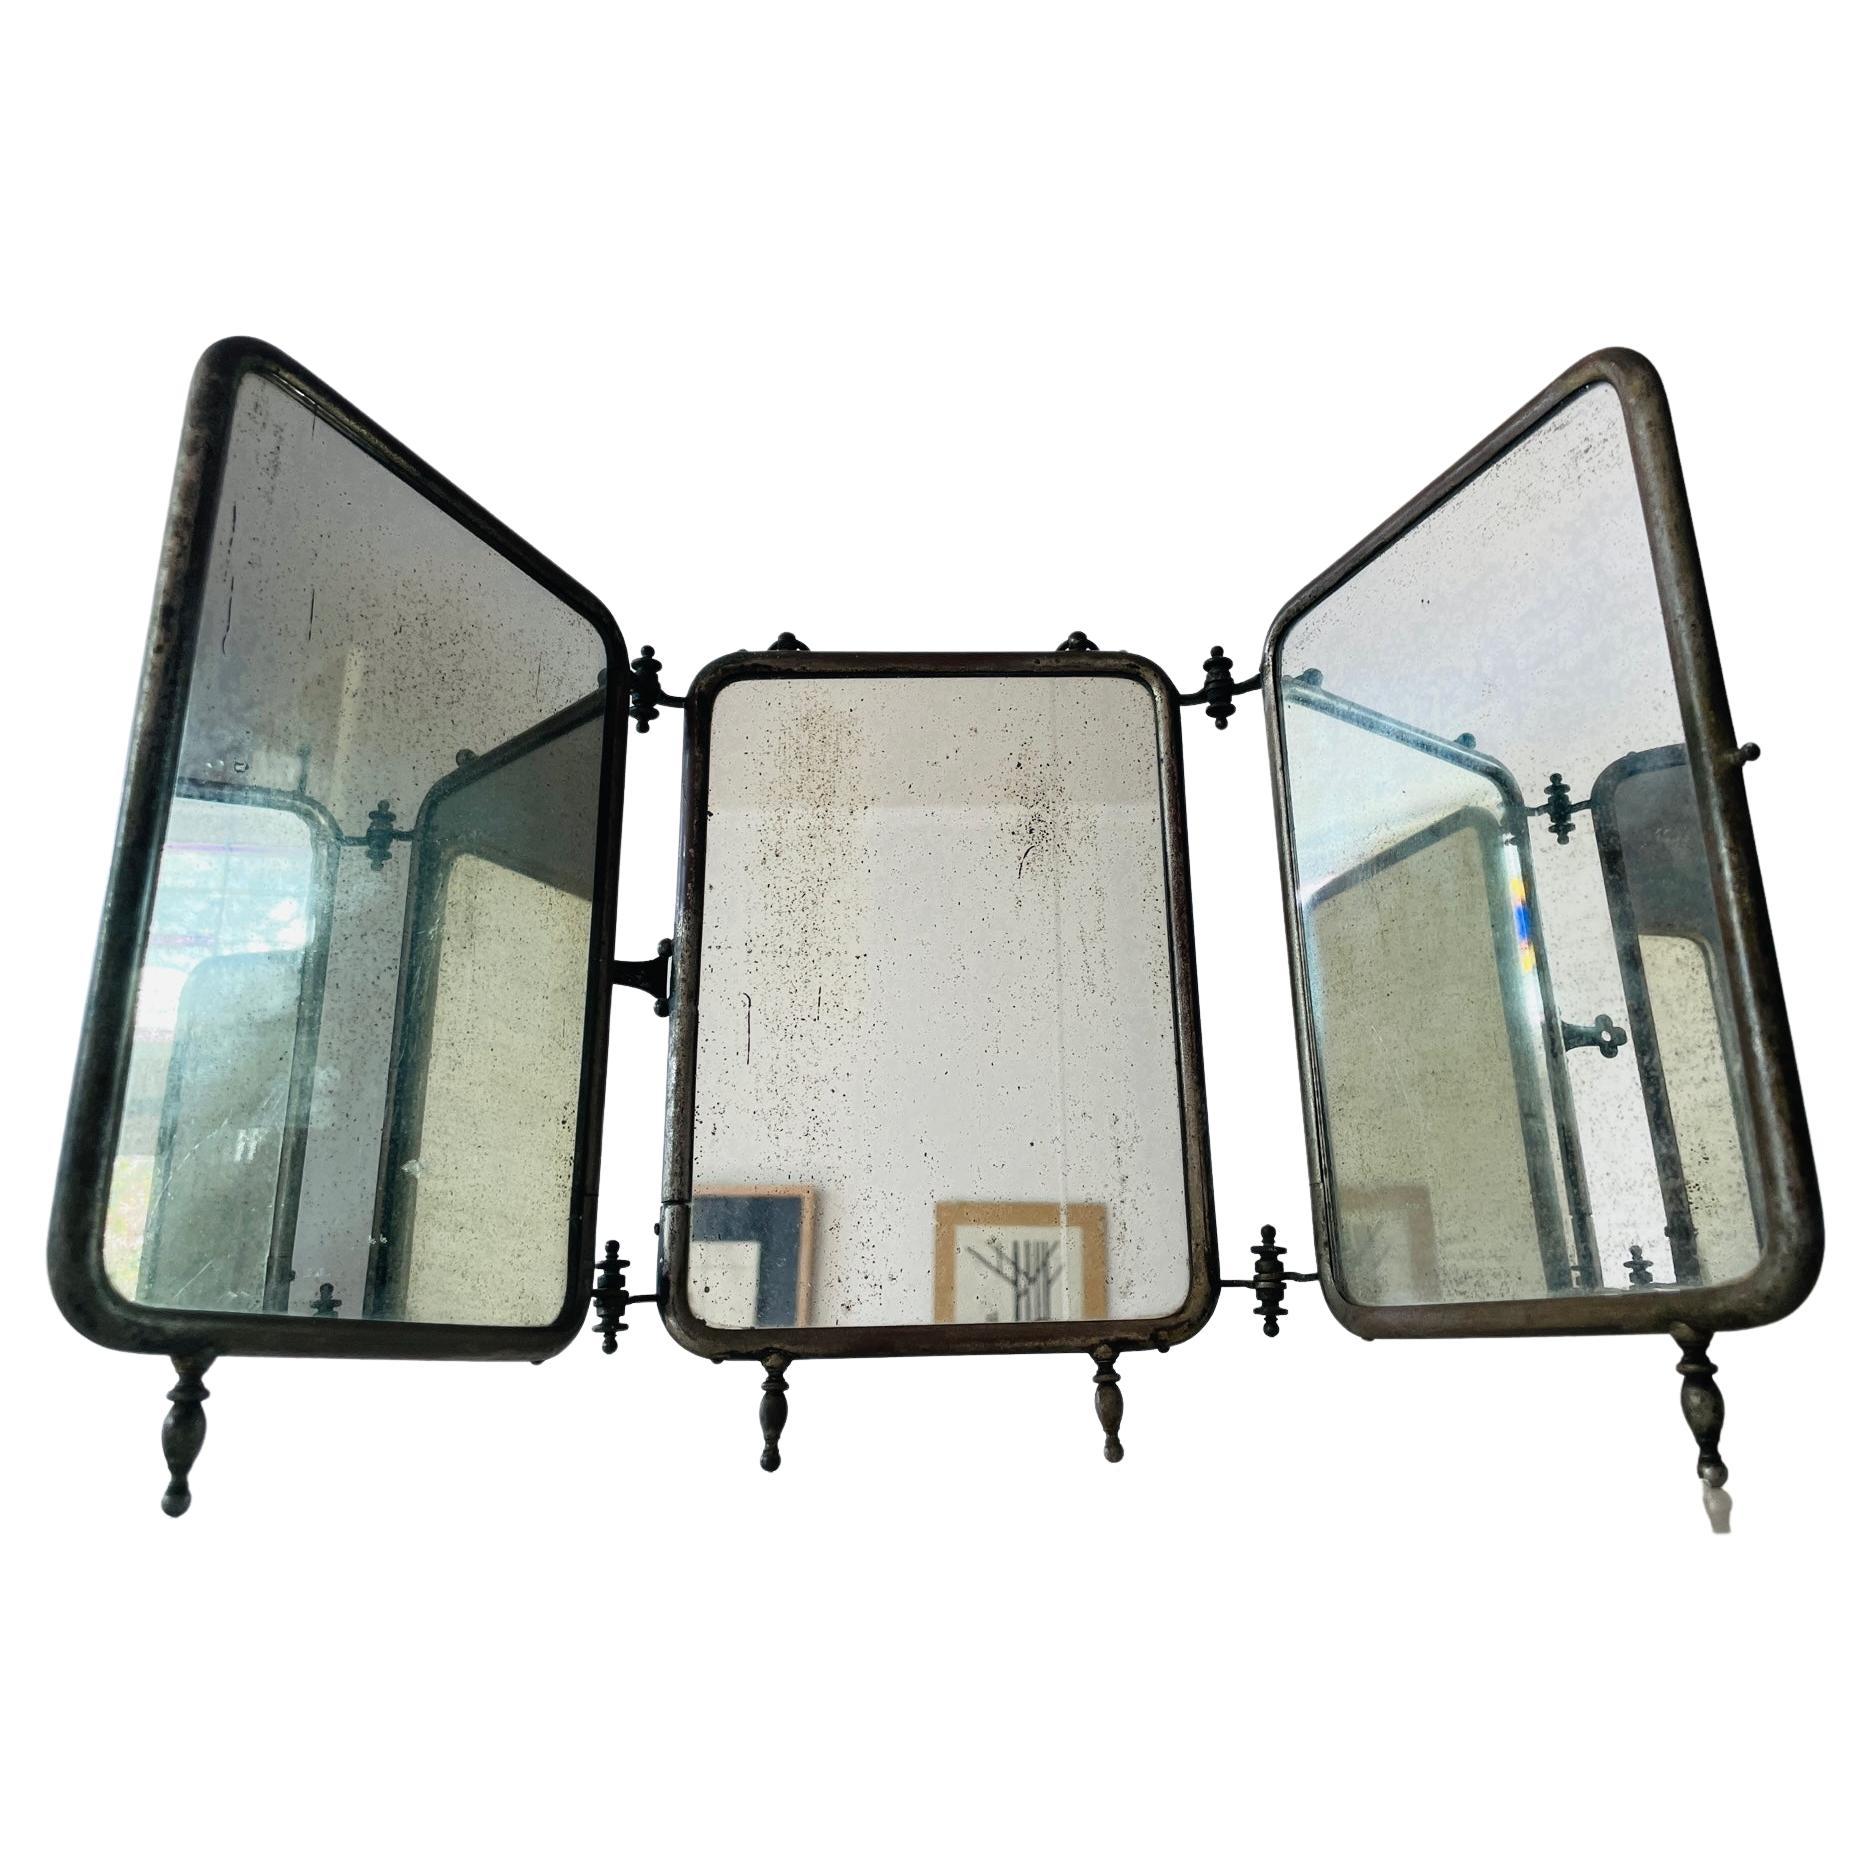 An antique barber's shaving mirror with three mirrors set in a tubular, nickel frames and leather backed. Held together by organic, curved hinges and metal chain. Folds up neatly into one compact piece. In beautiful antique condition, a must have